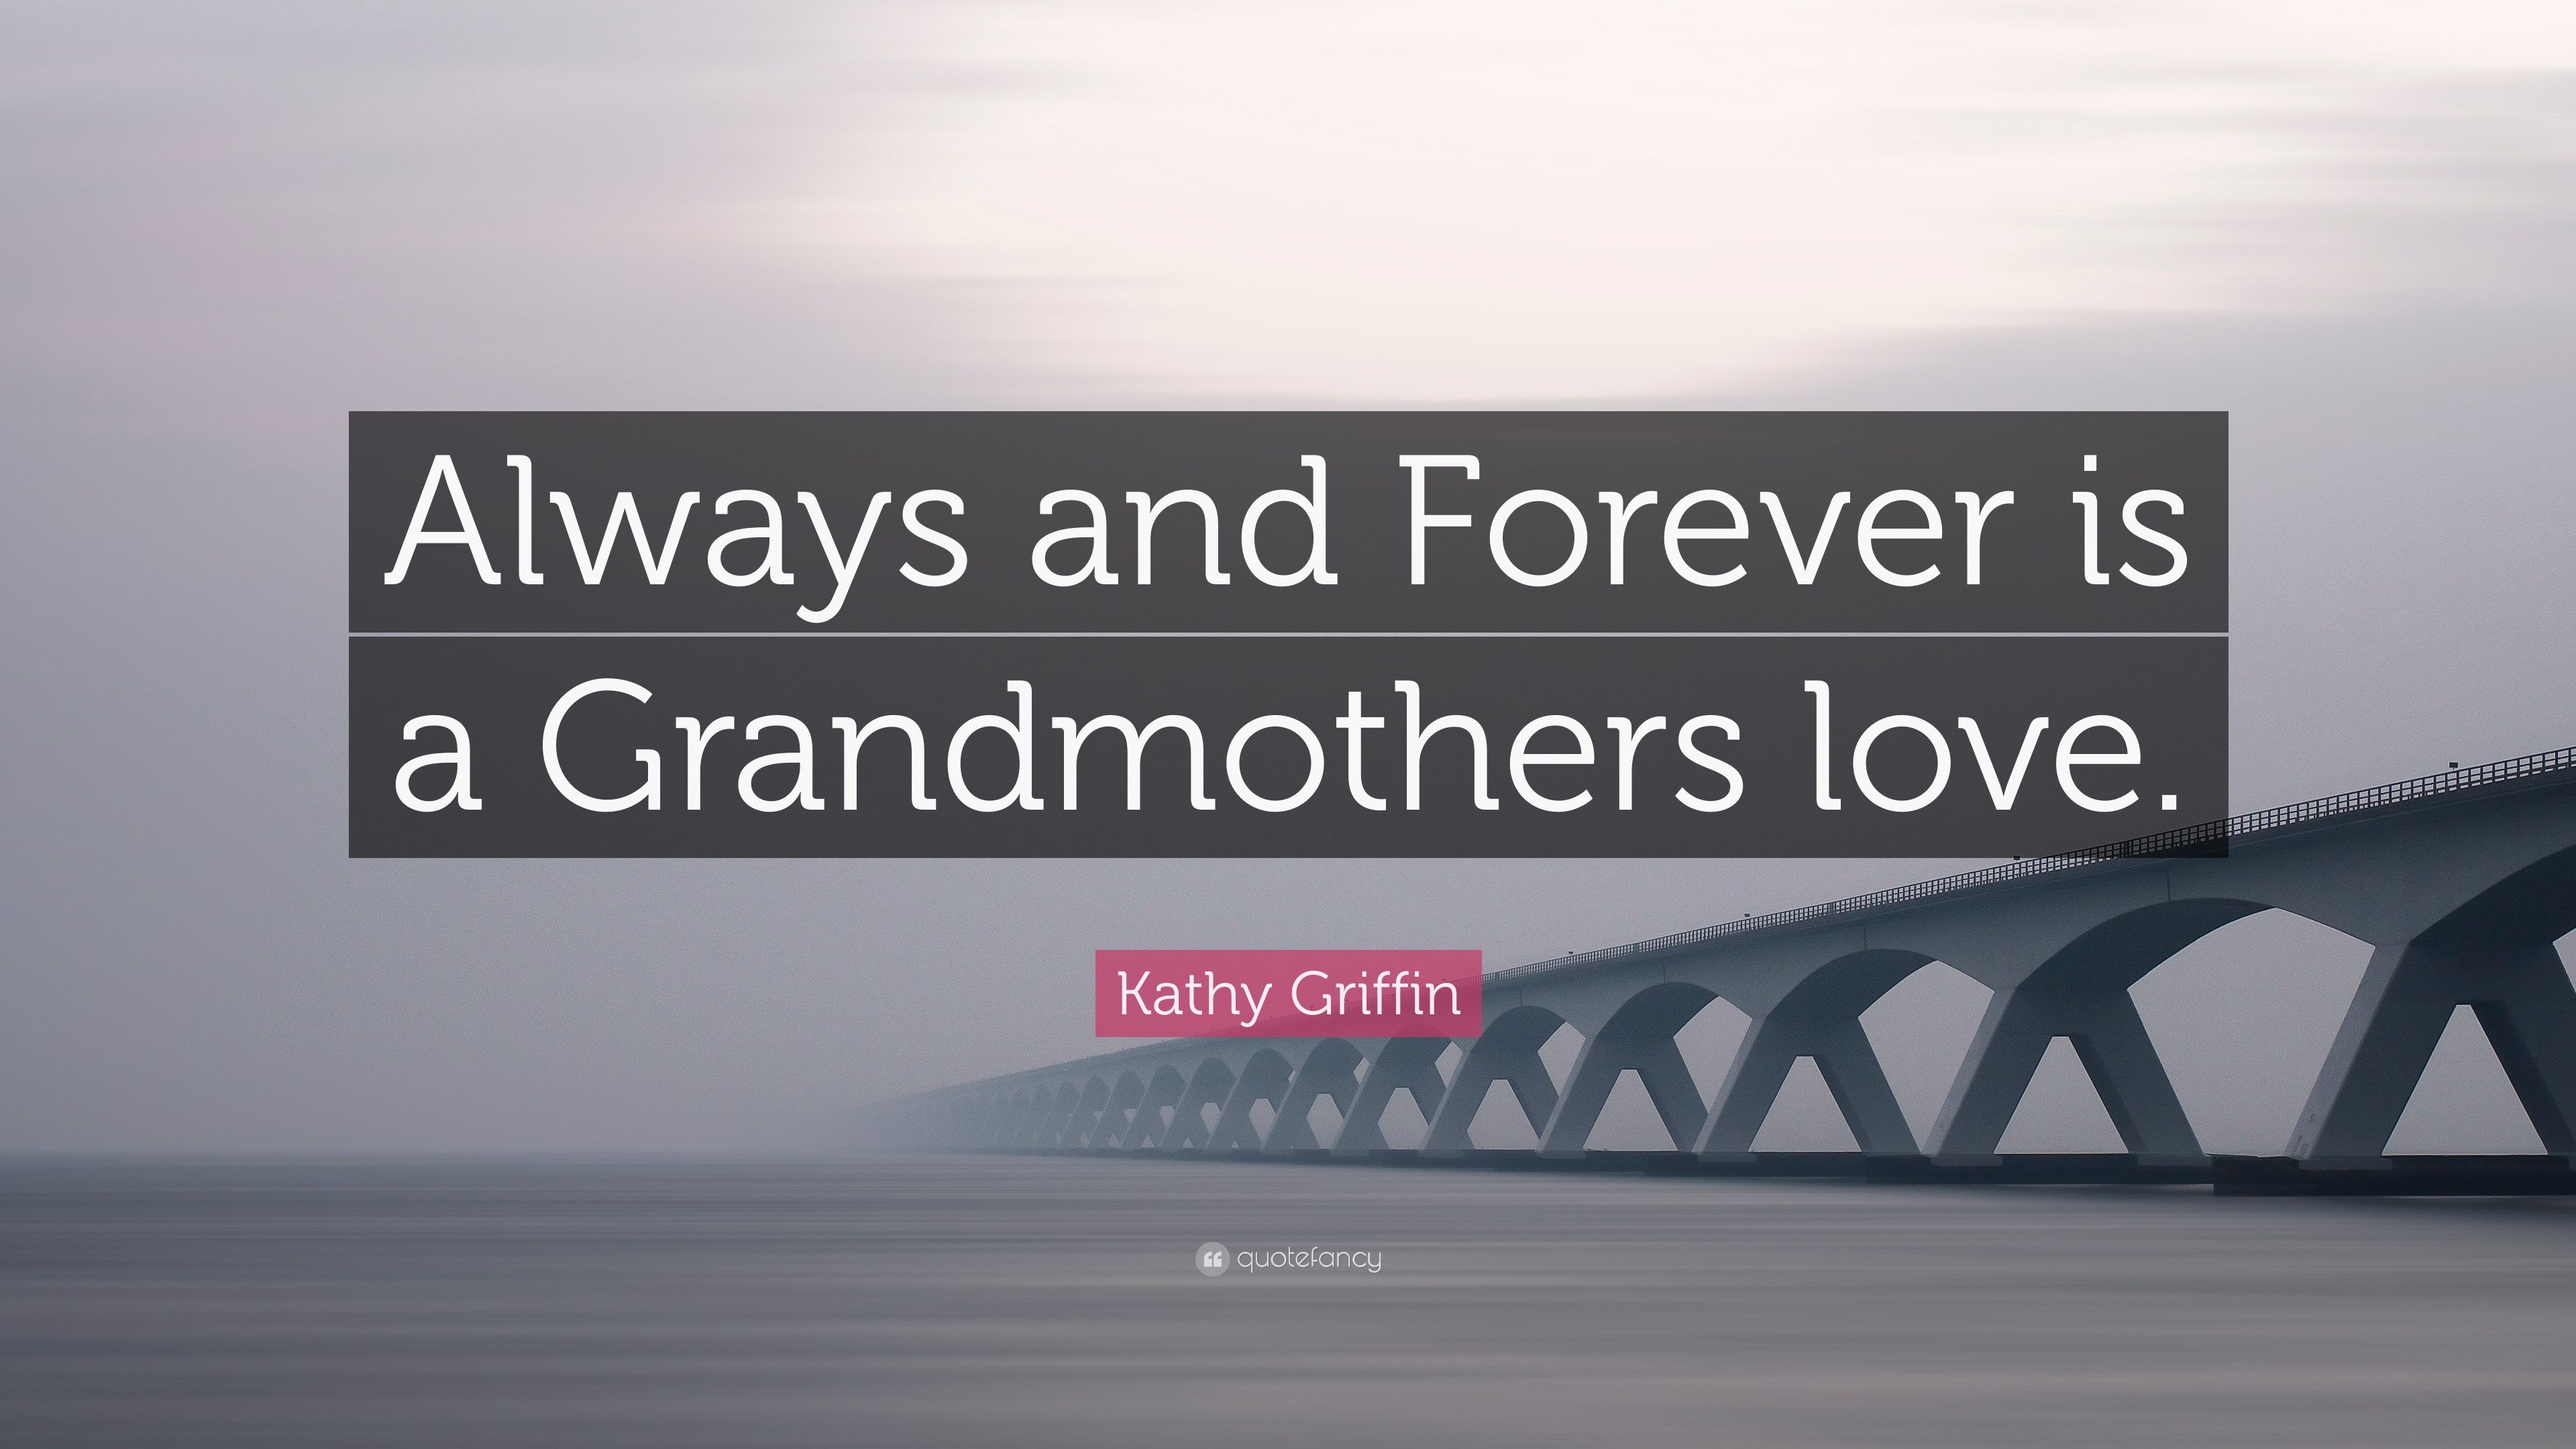 Kathy Griffin Quote: "Always and Forever is a Grandmothers love.